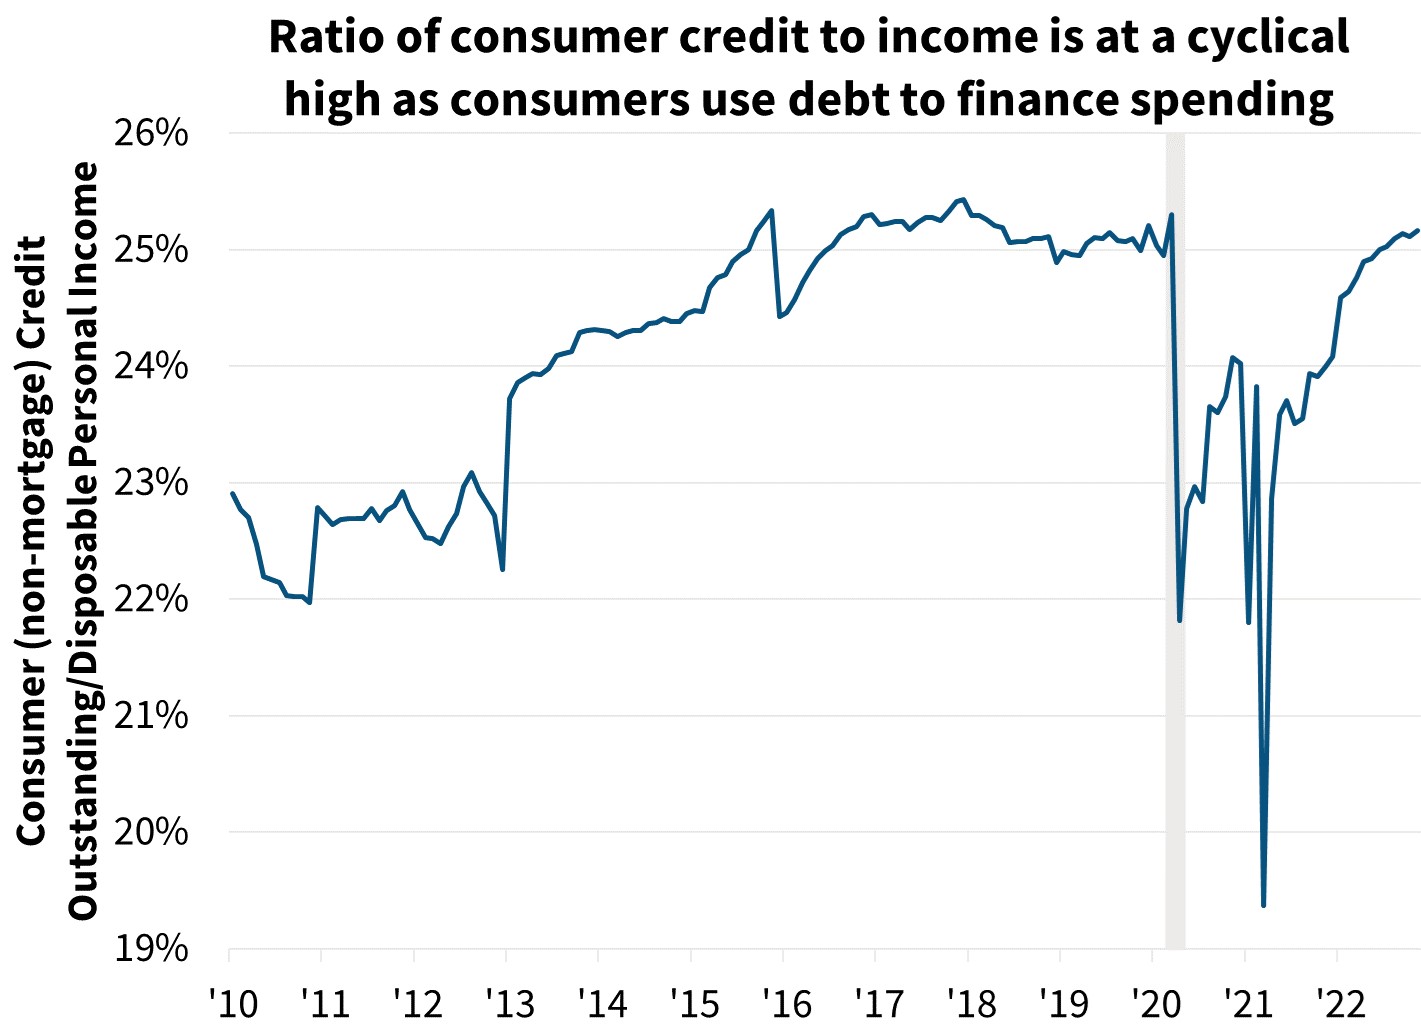  Ratio of consumer credit to income is at a cyclical high as consumers use debt to finance spending